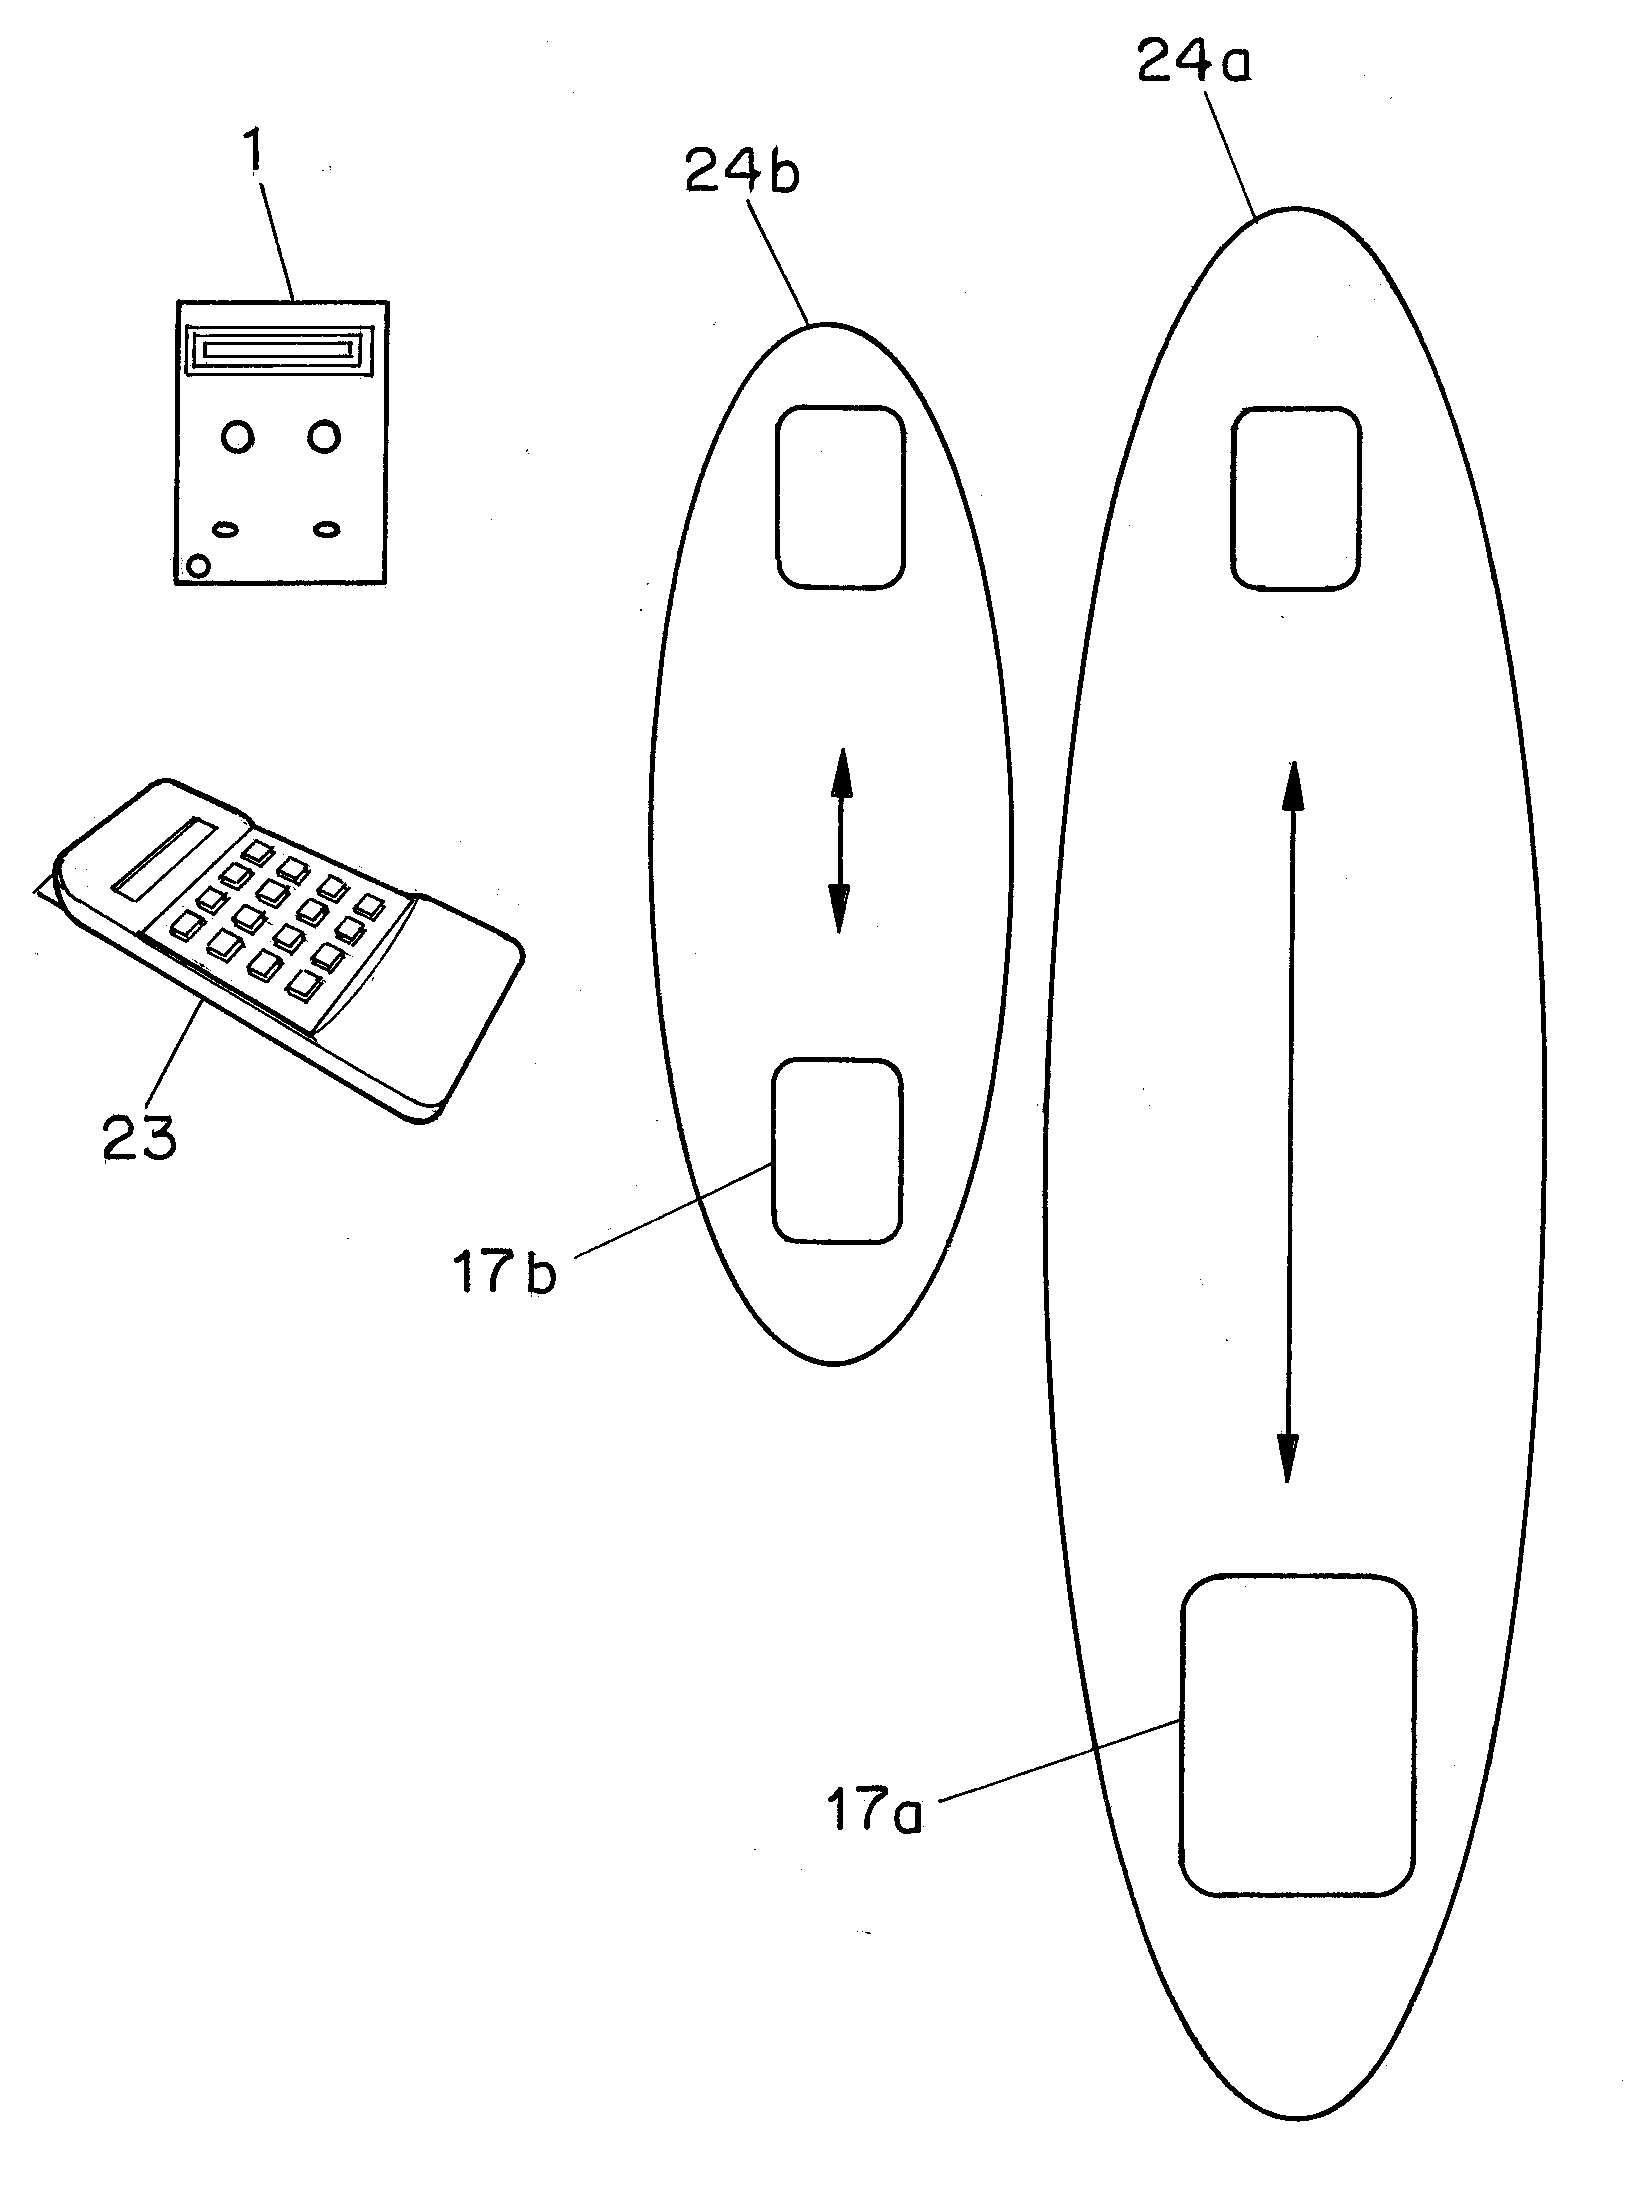 Networked RF tag for tracking baggage